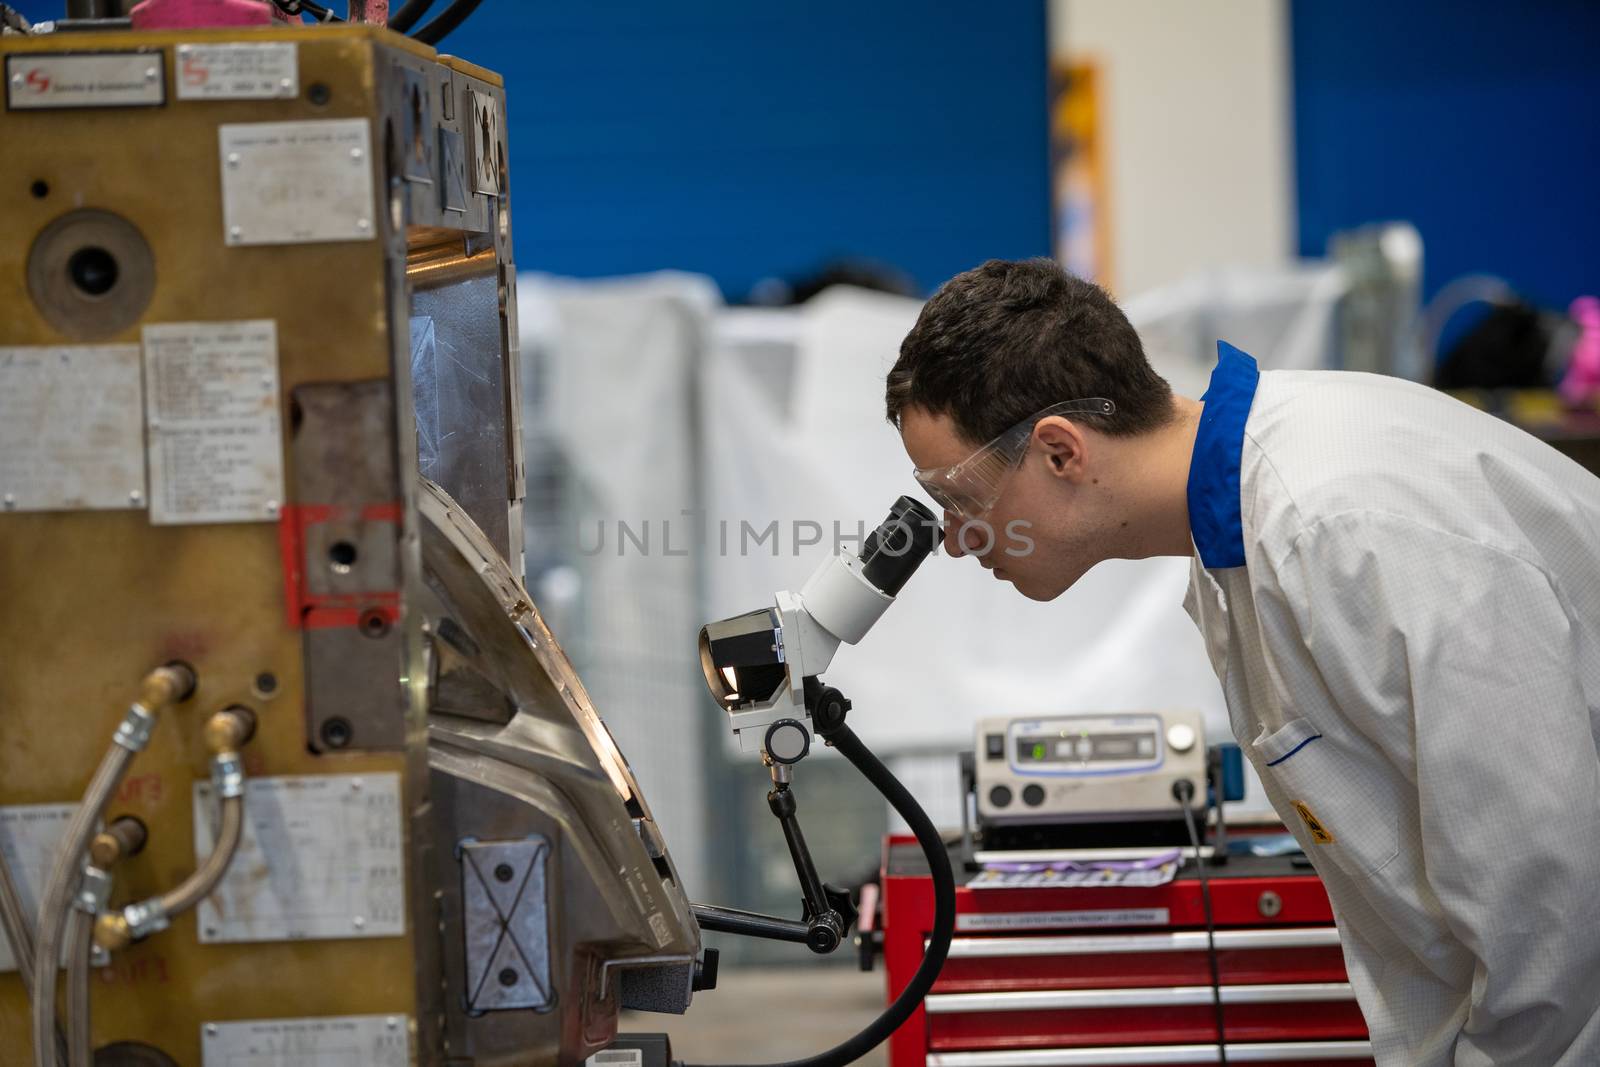 the engineer checks the correct setting of the metal mold for castings in the factory using a microscope by Edophoto